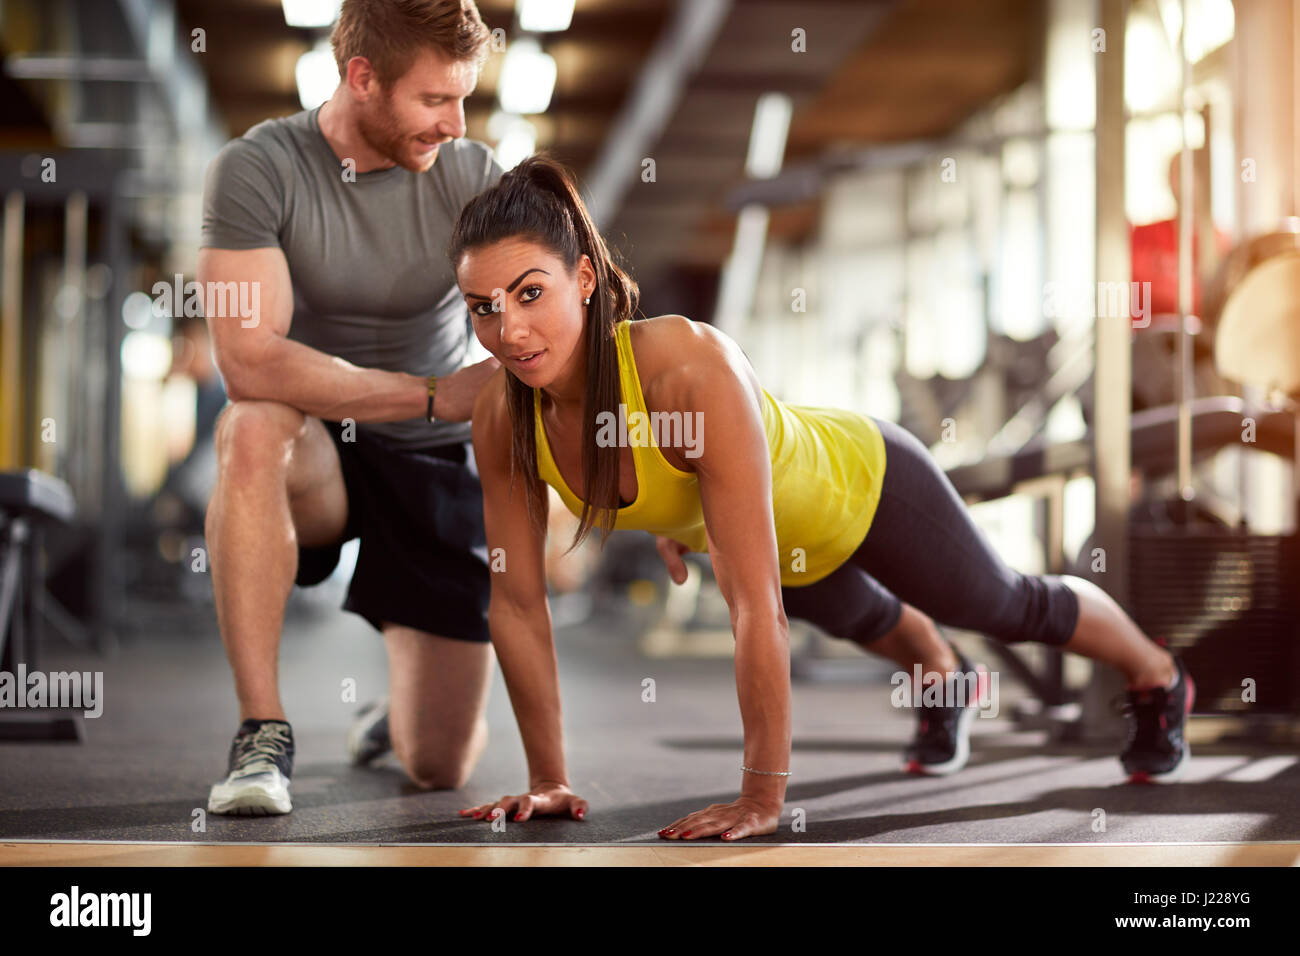 Girl doing pushups with trainer's helps in fitness club Stock Photo